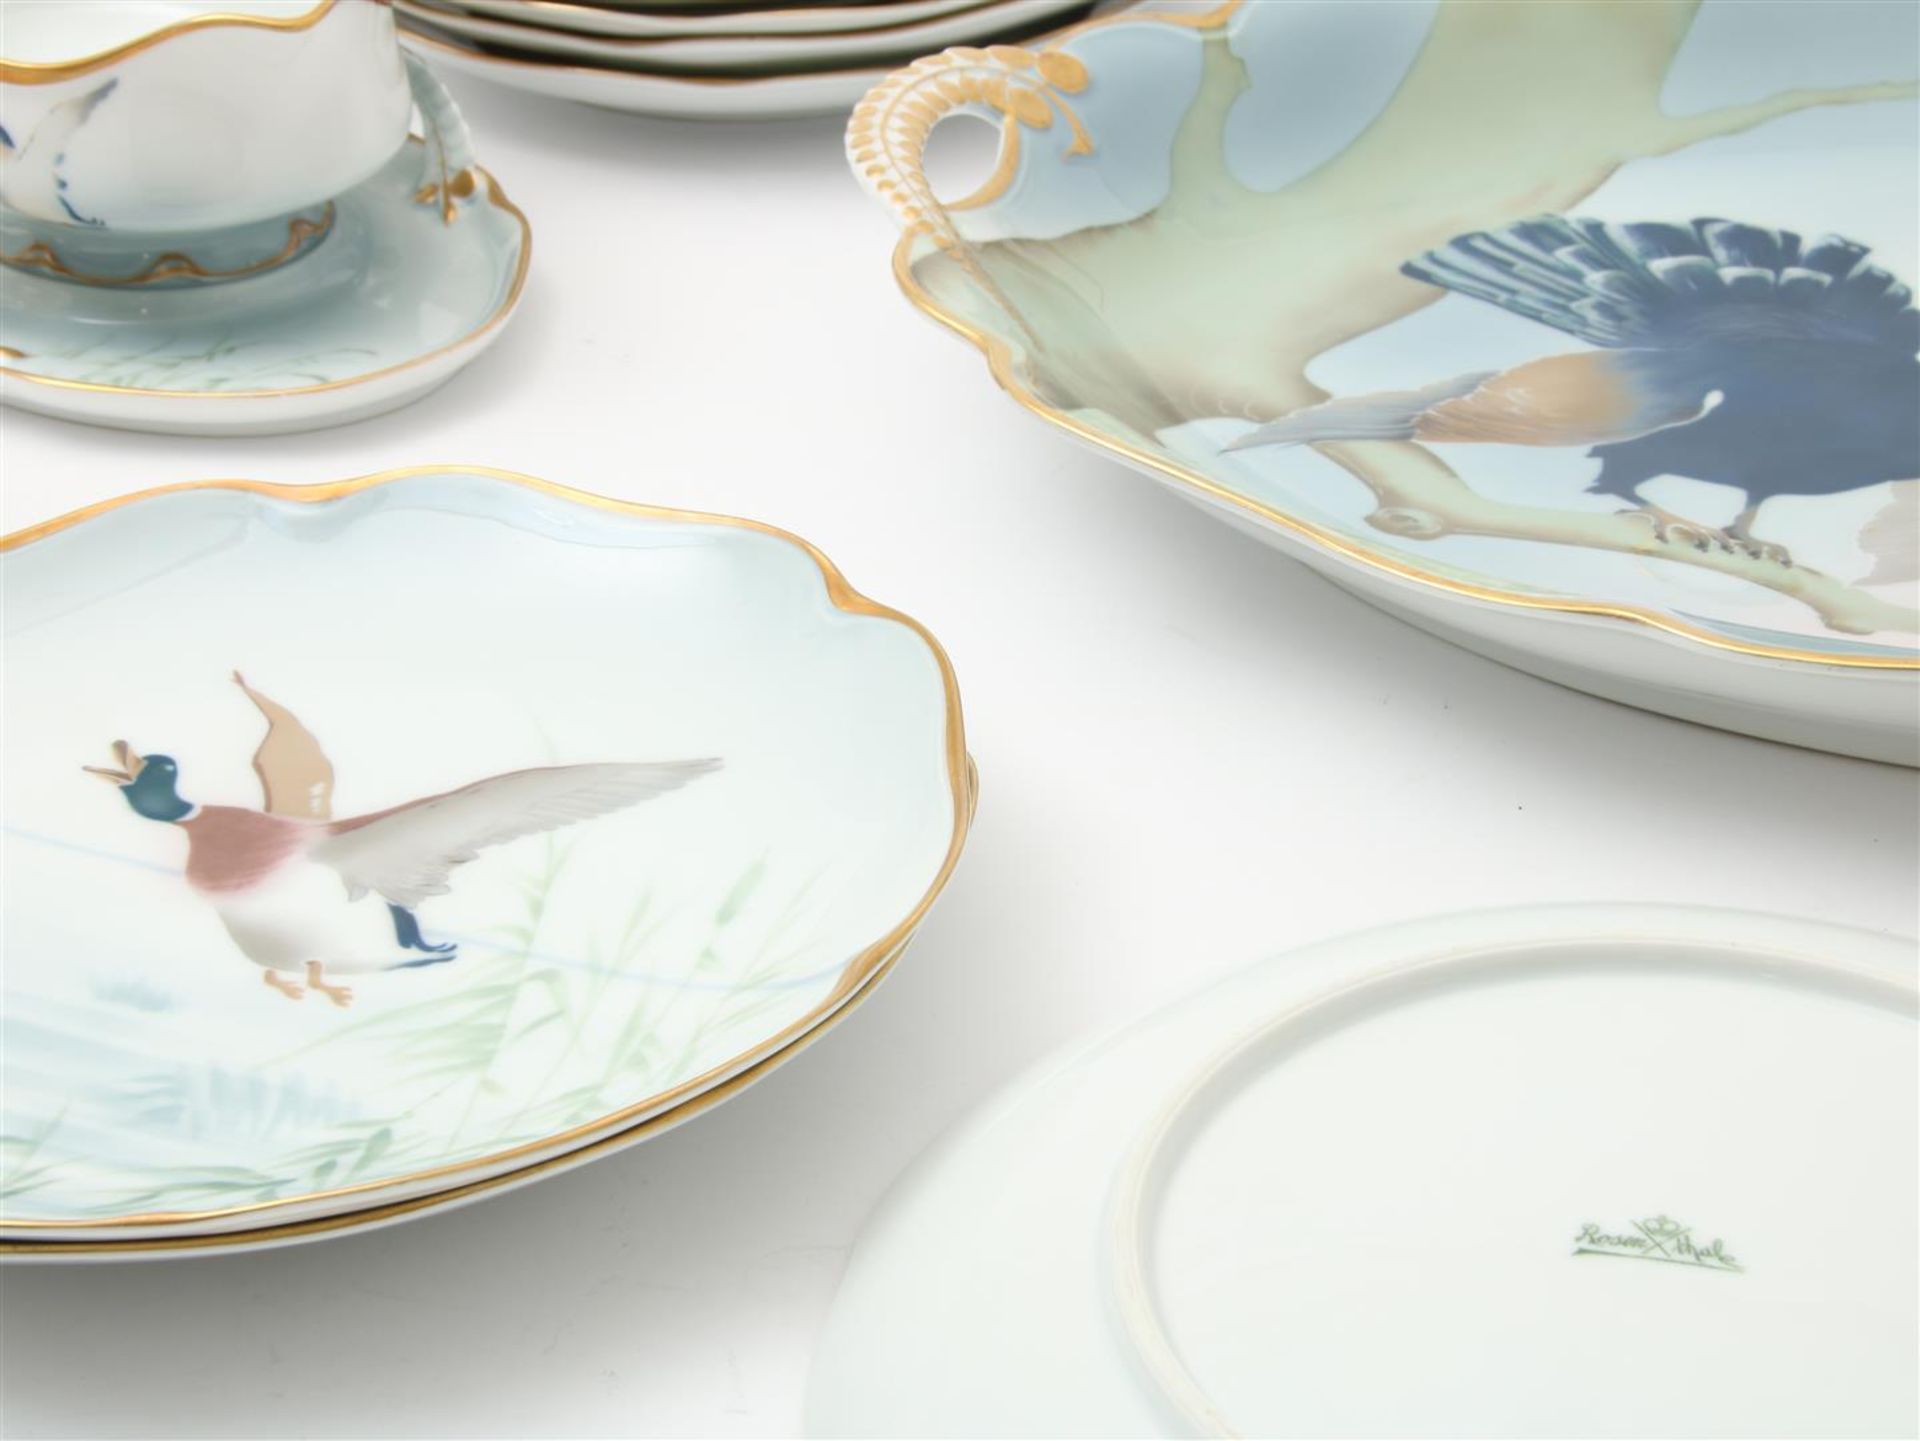 Porcelain hunting service, consisting of 12 plates, tureen, sauce boat and serving bowl with decor - Image 2 of 2